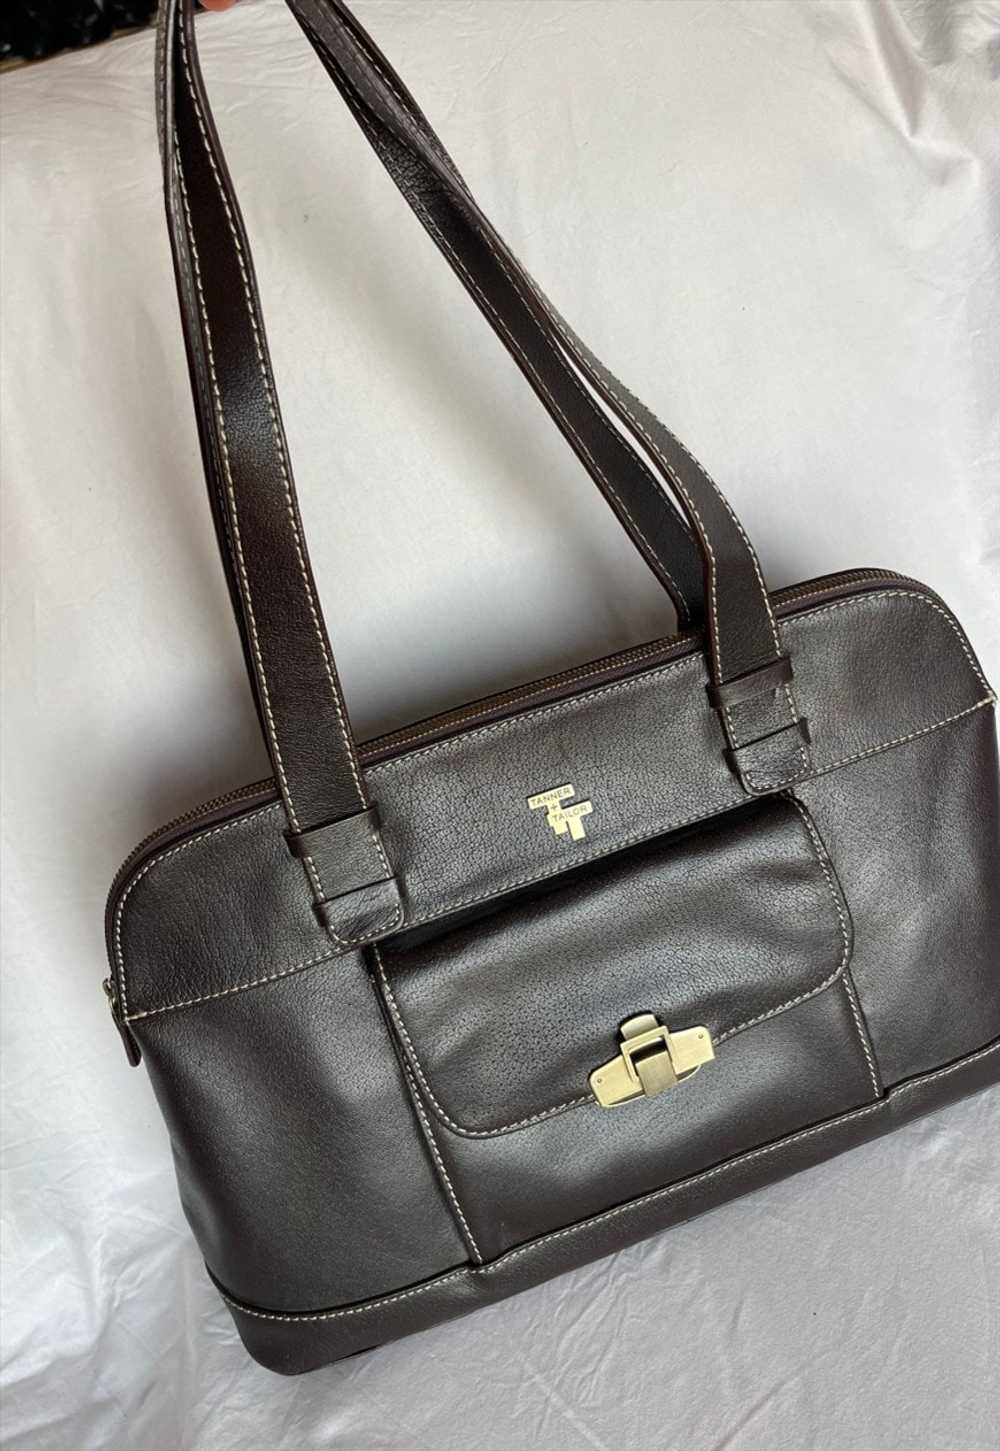 Vintage Tanner Tailor Chocolate Leather Bag - image 4